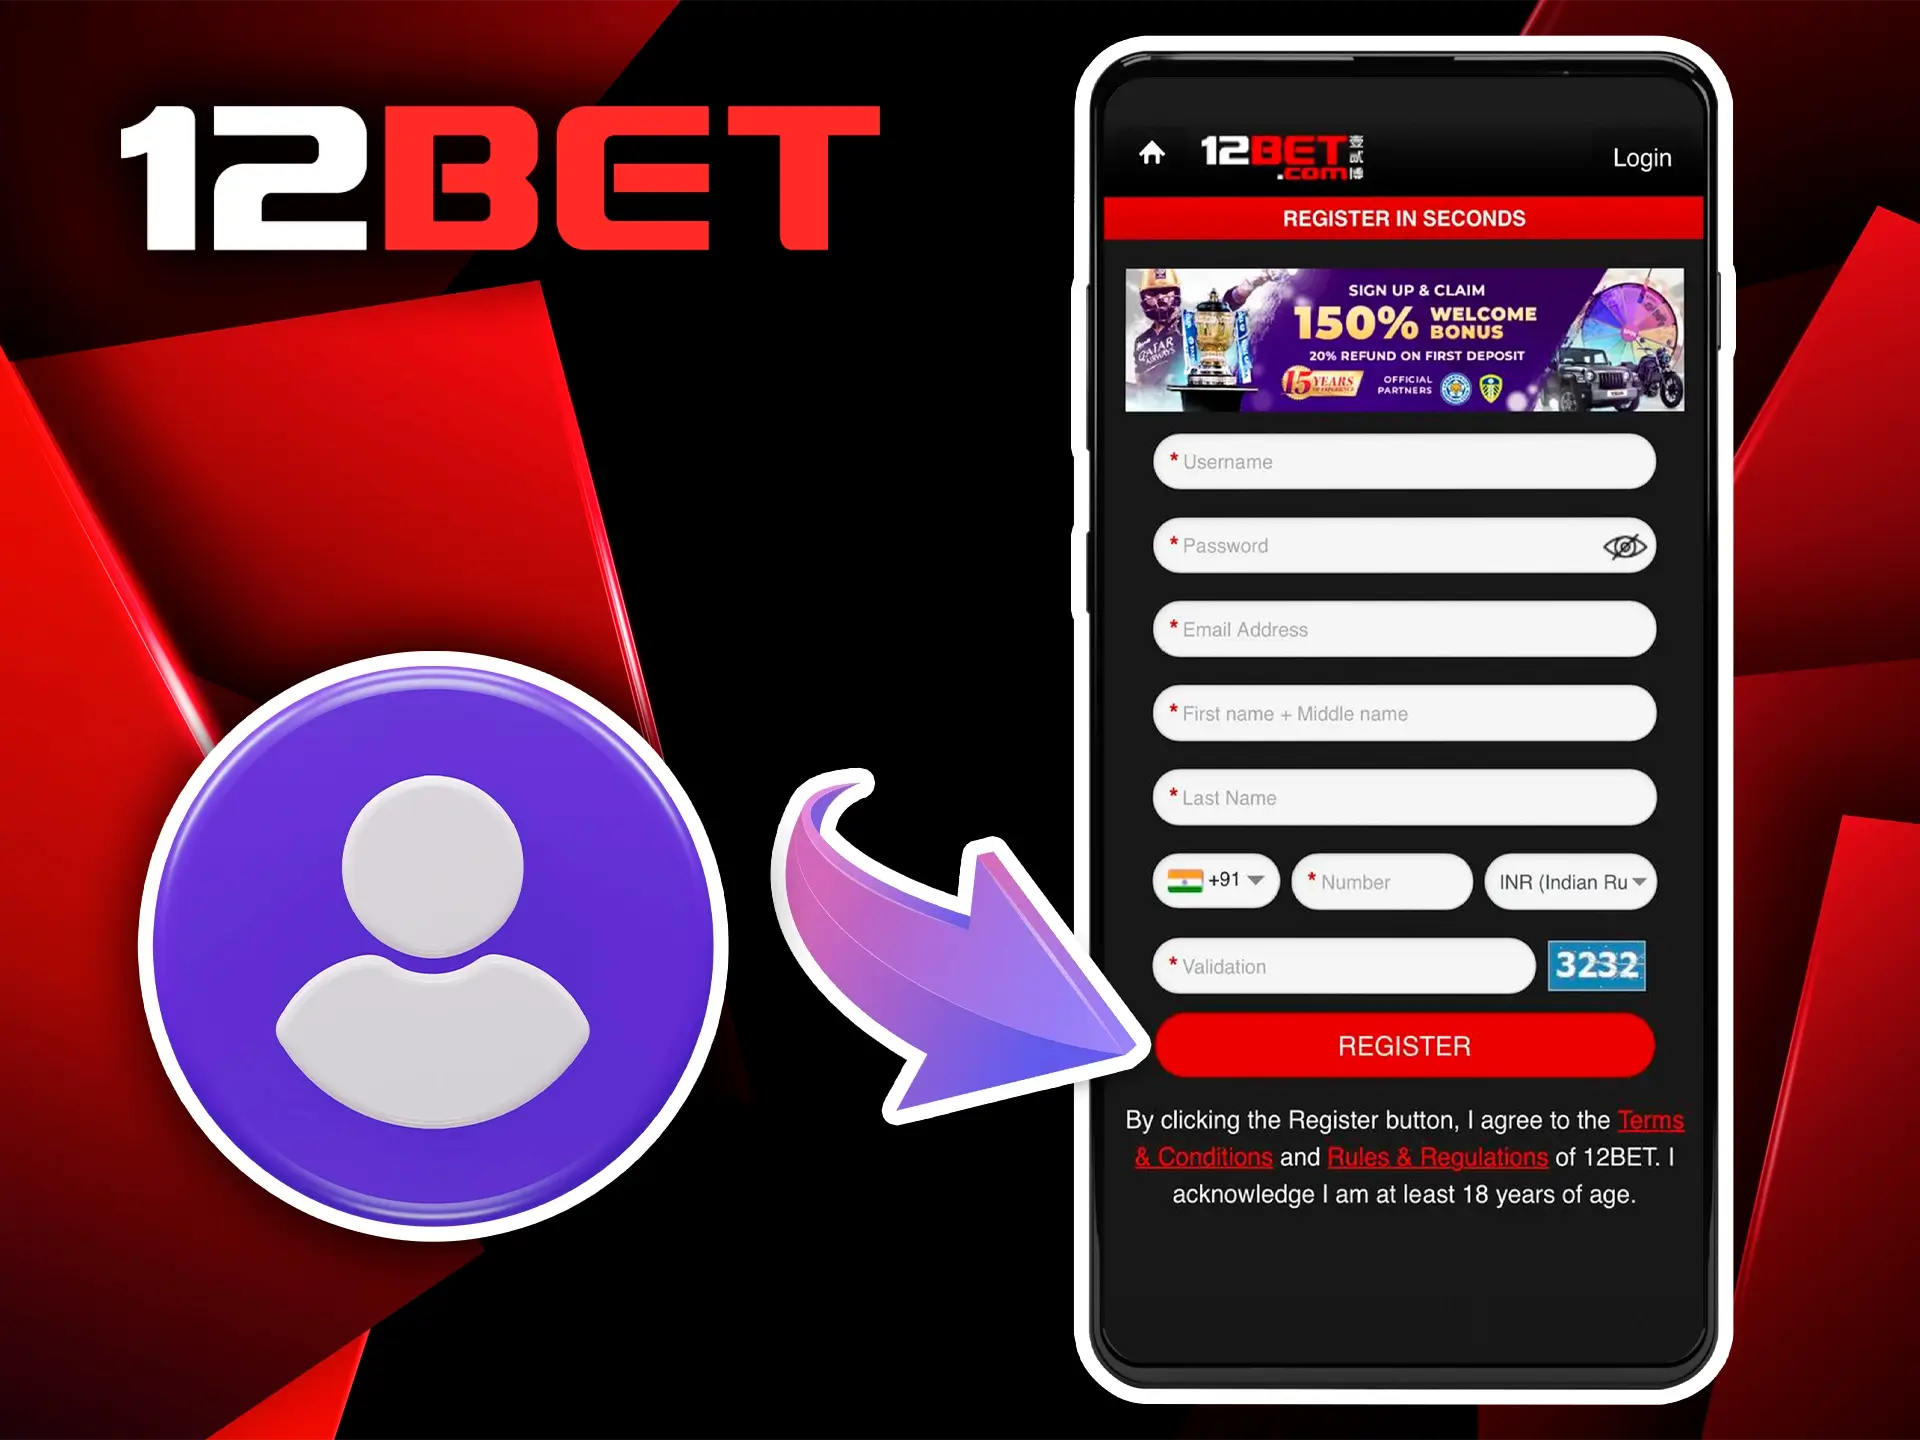 Use the 12Bet mobile app for instant registration and quick top-ups.